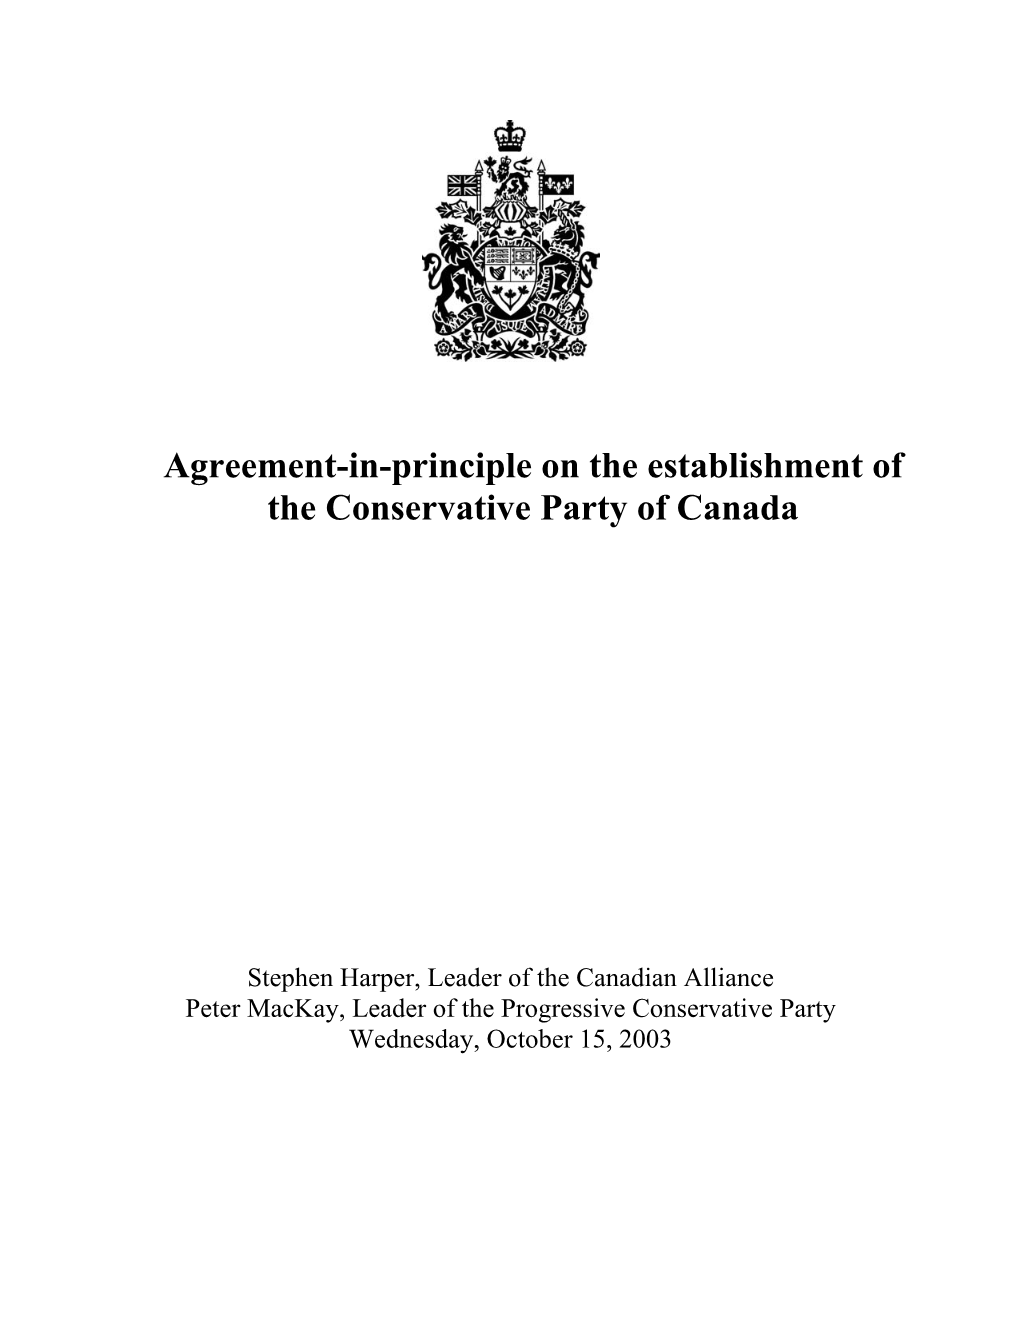 Agreement-In-Principle on the Establishment of the Conservative Party of Canada